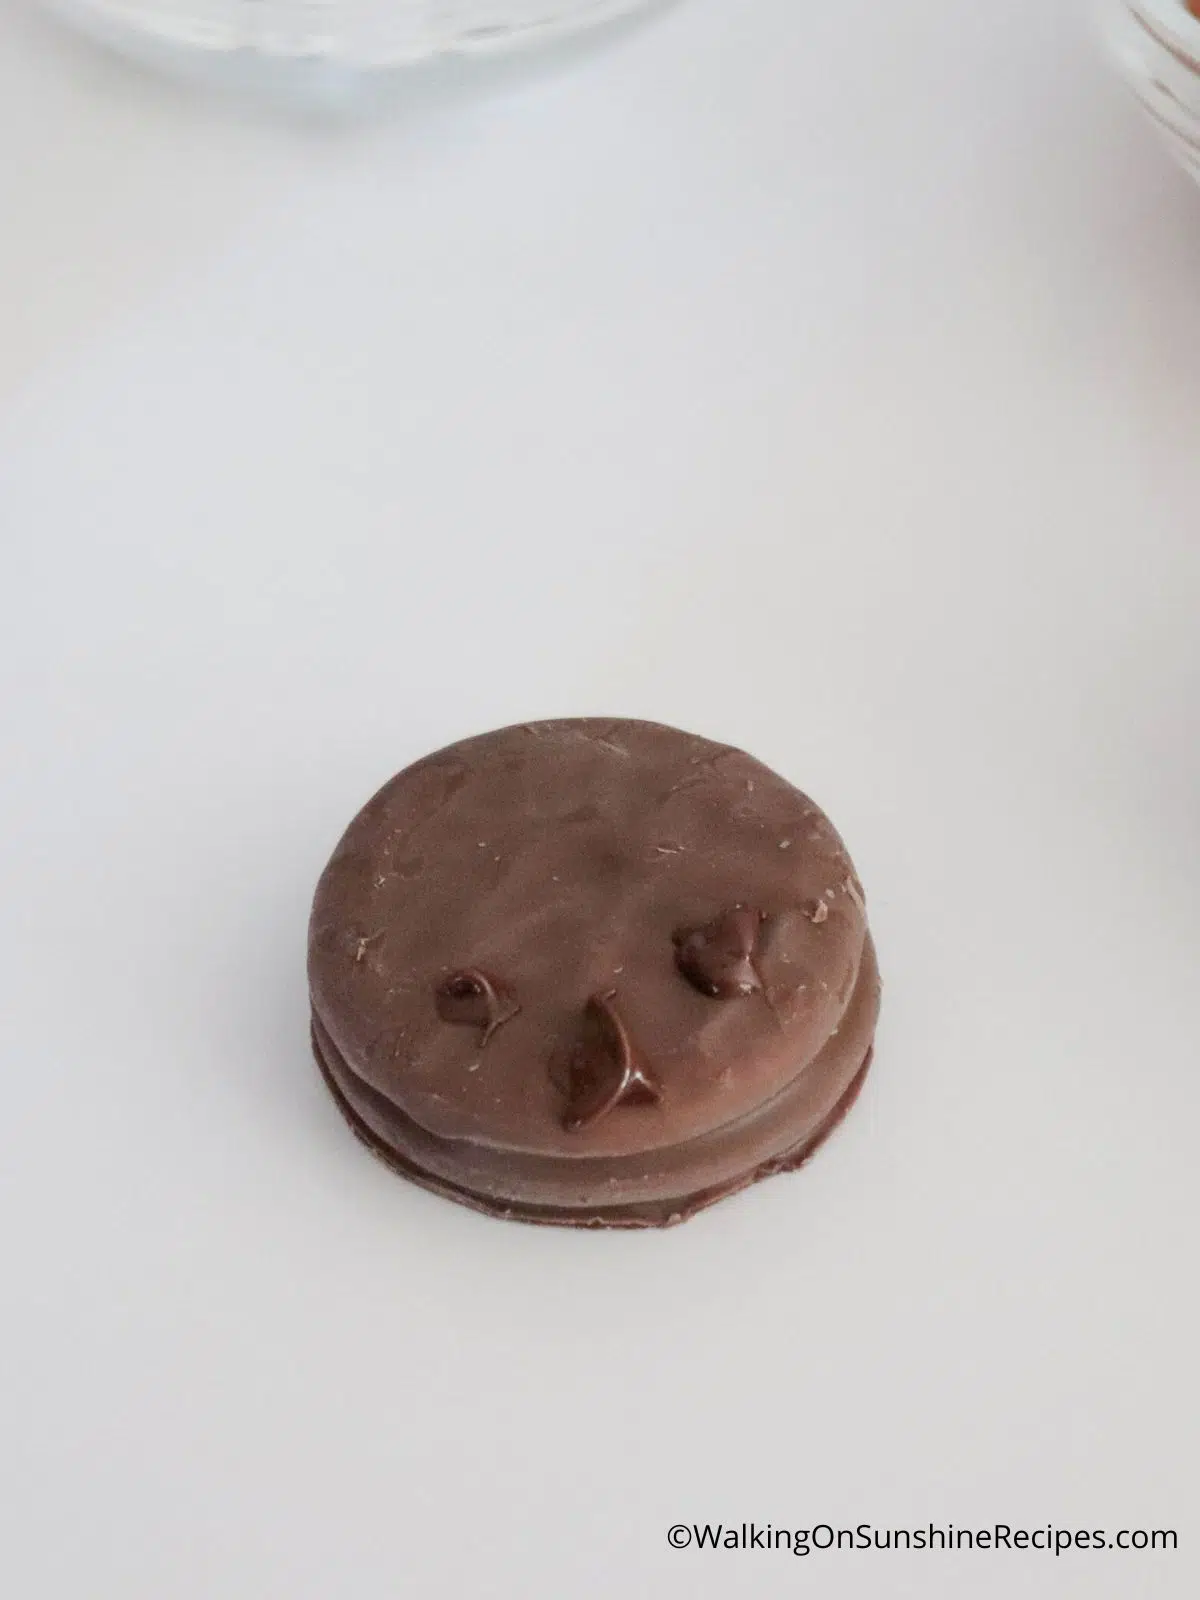 Add melted chocolate to adhere candy eyes and nose for reindeer.